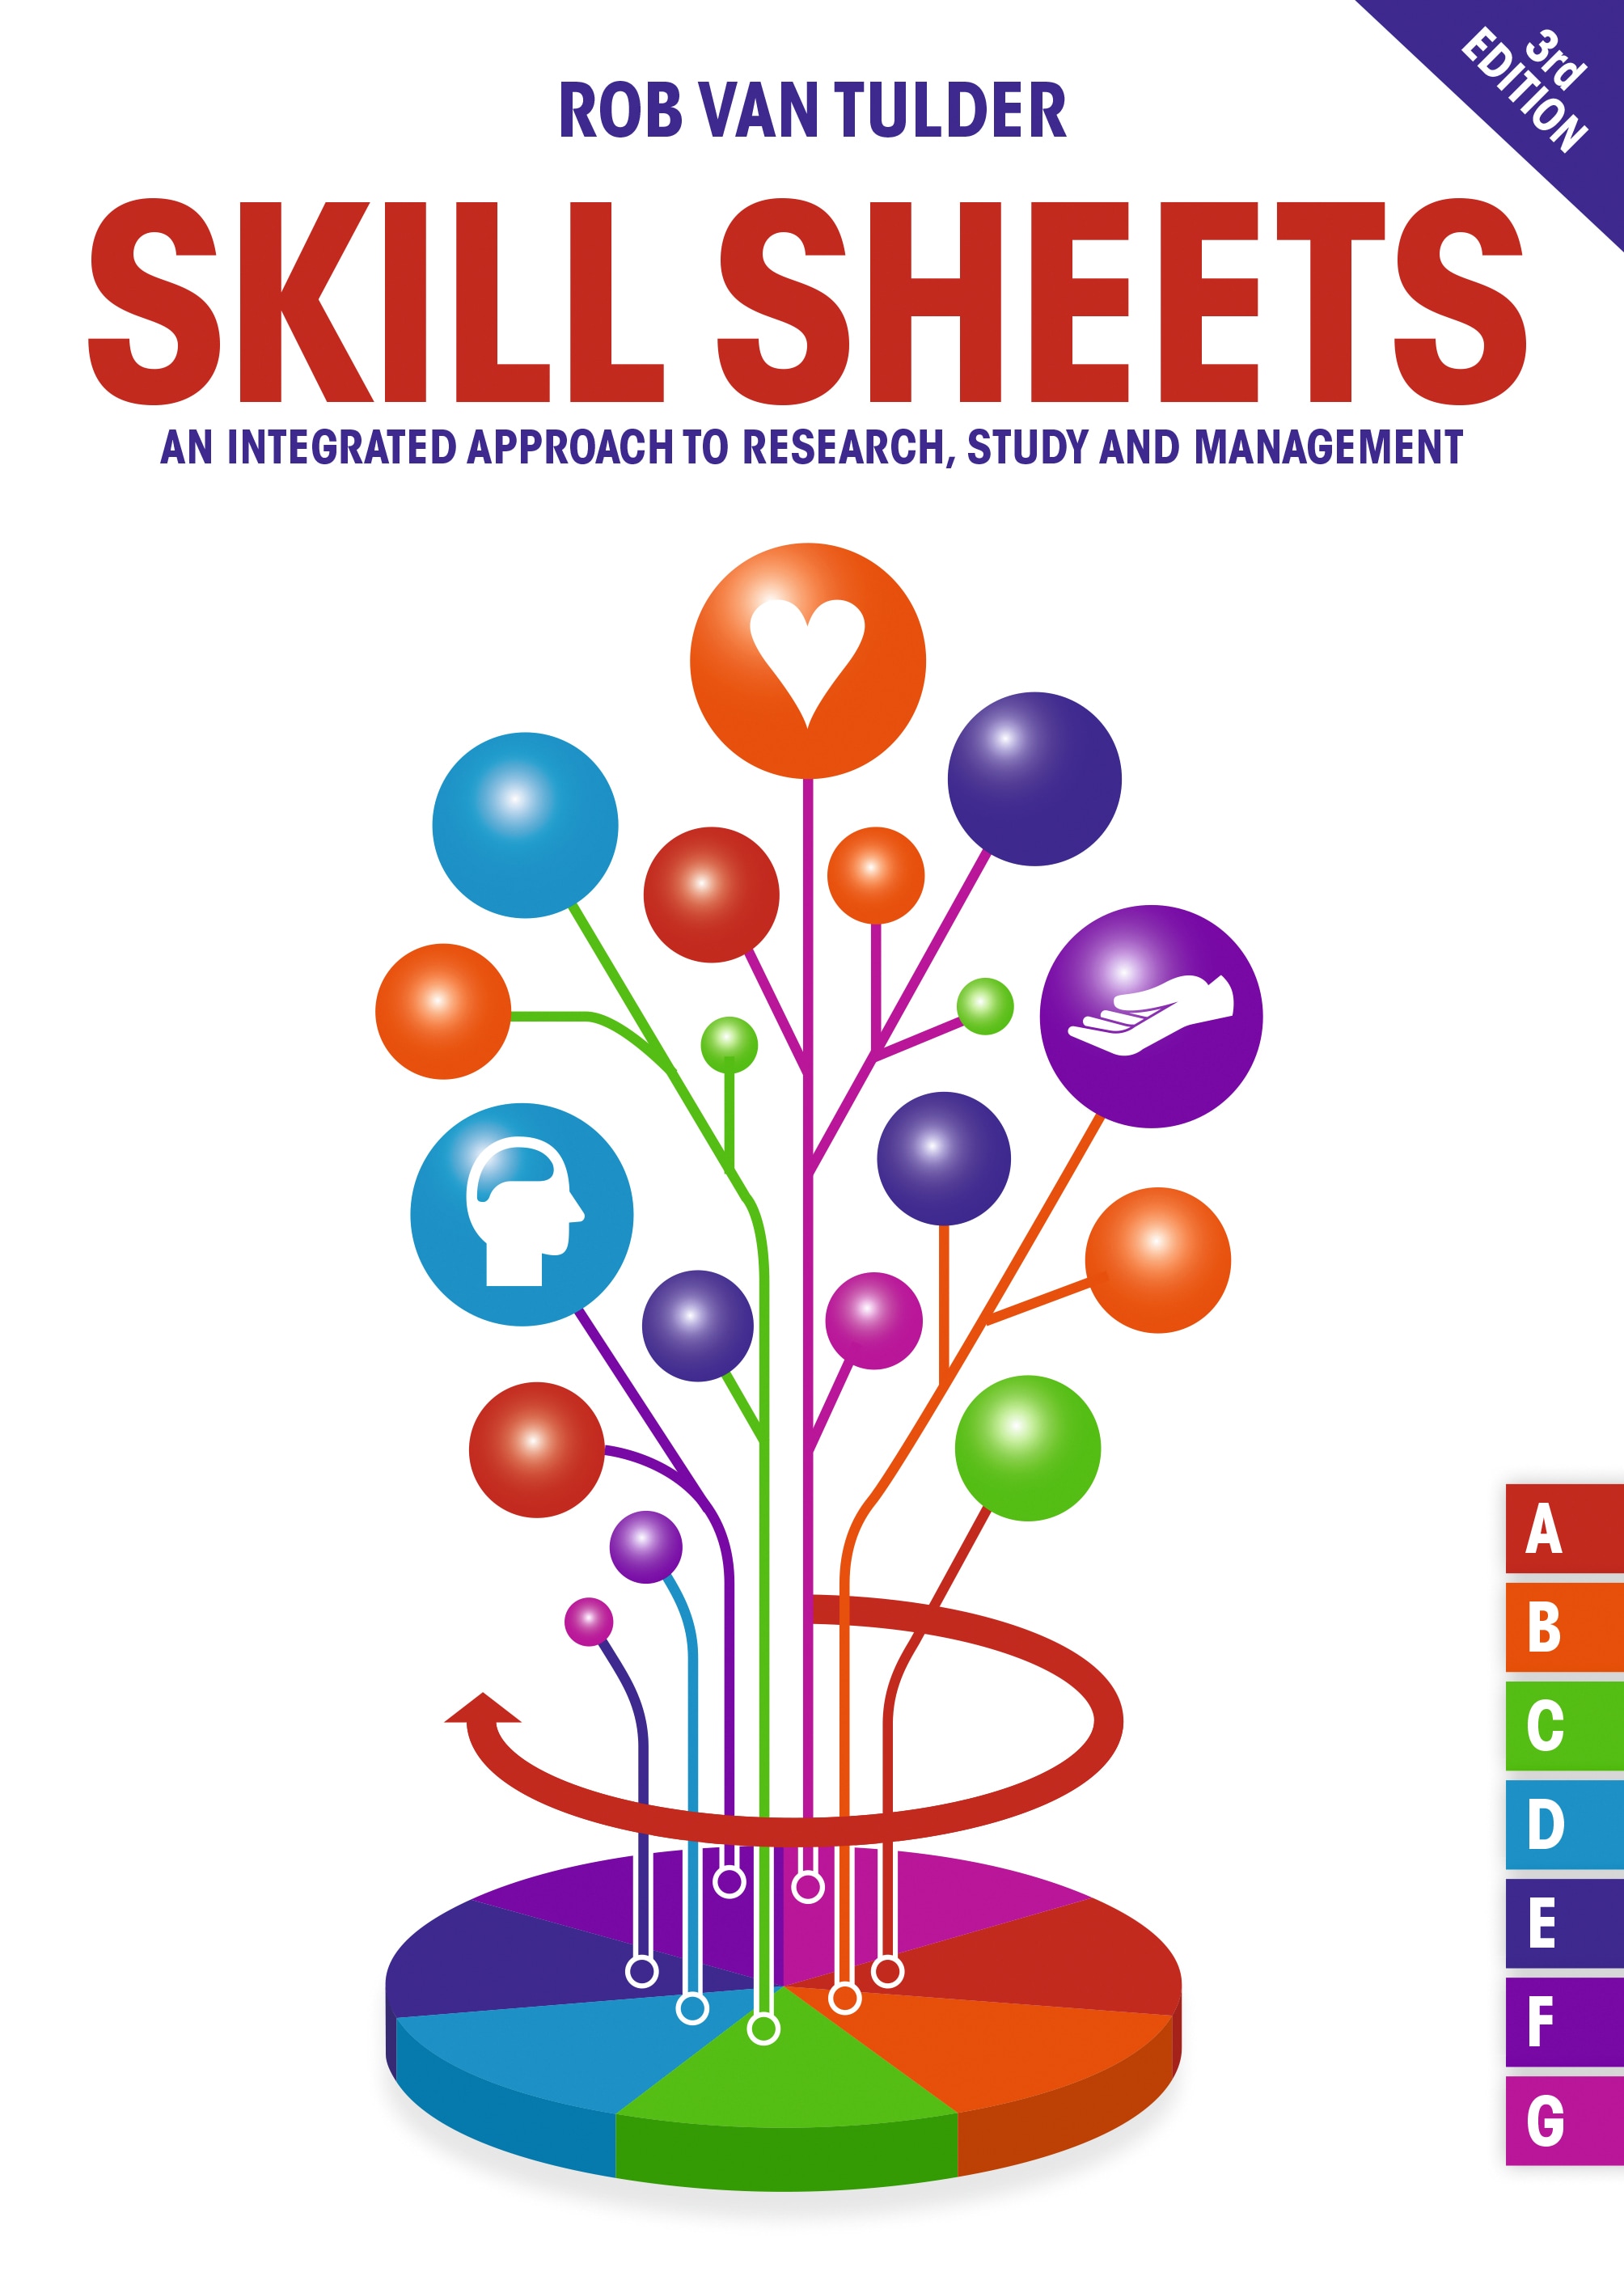 <img alt="Skill Sheets, 3rd Edition. An Integrated Approach to Research, Study and Management. Rob van Tulder">